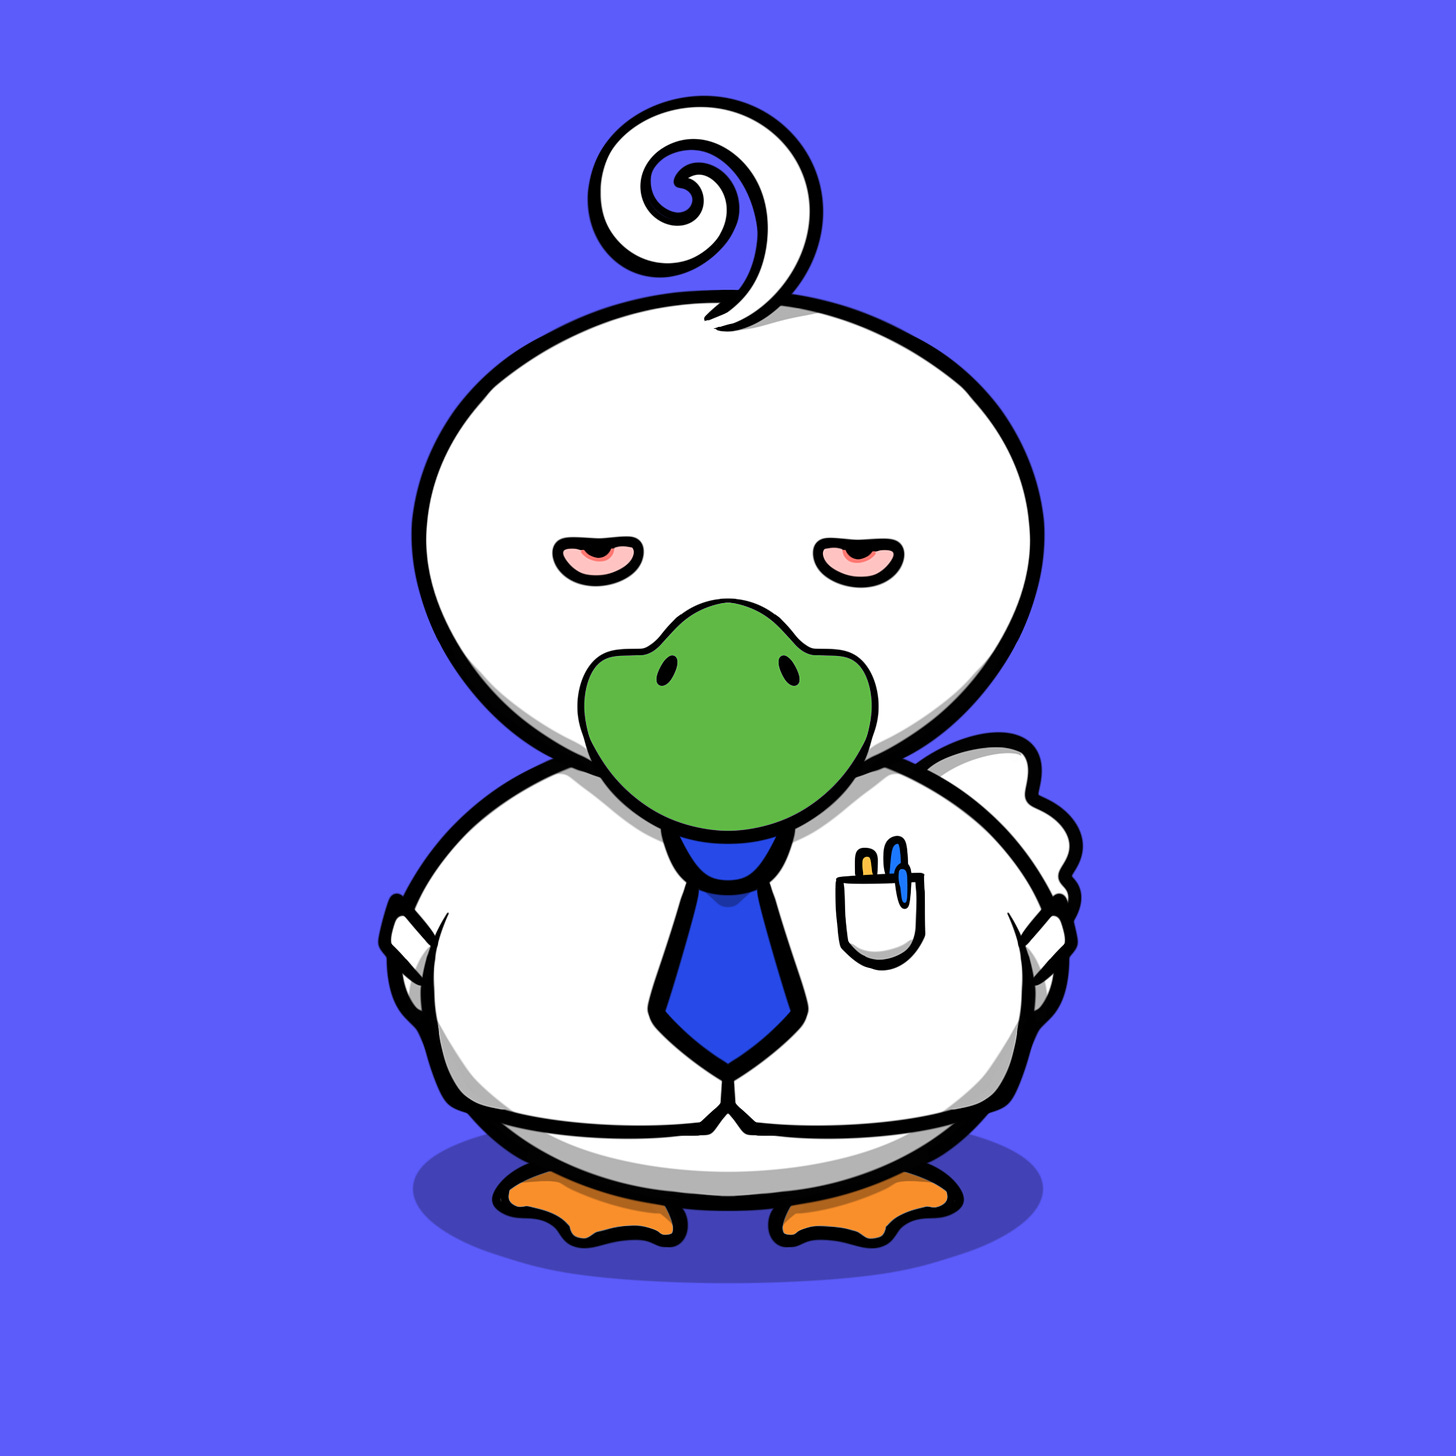 A duck with a tie on a blue background.